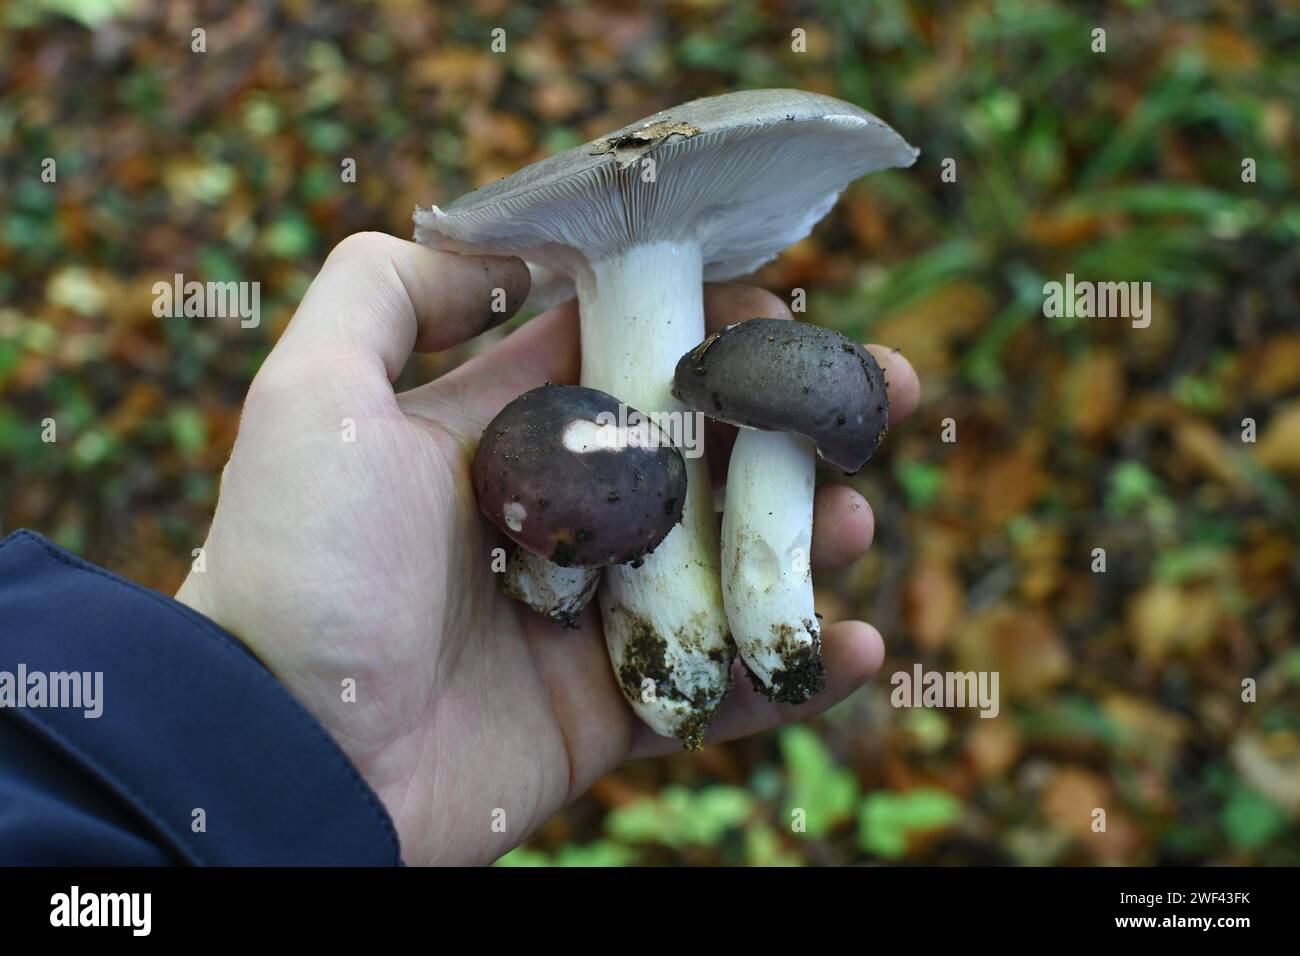 A nice bunch of carcoal burner mushrooms (Russula cyanoxantha) gathered in deciduous woodland in North East England Stock Photo